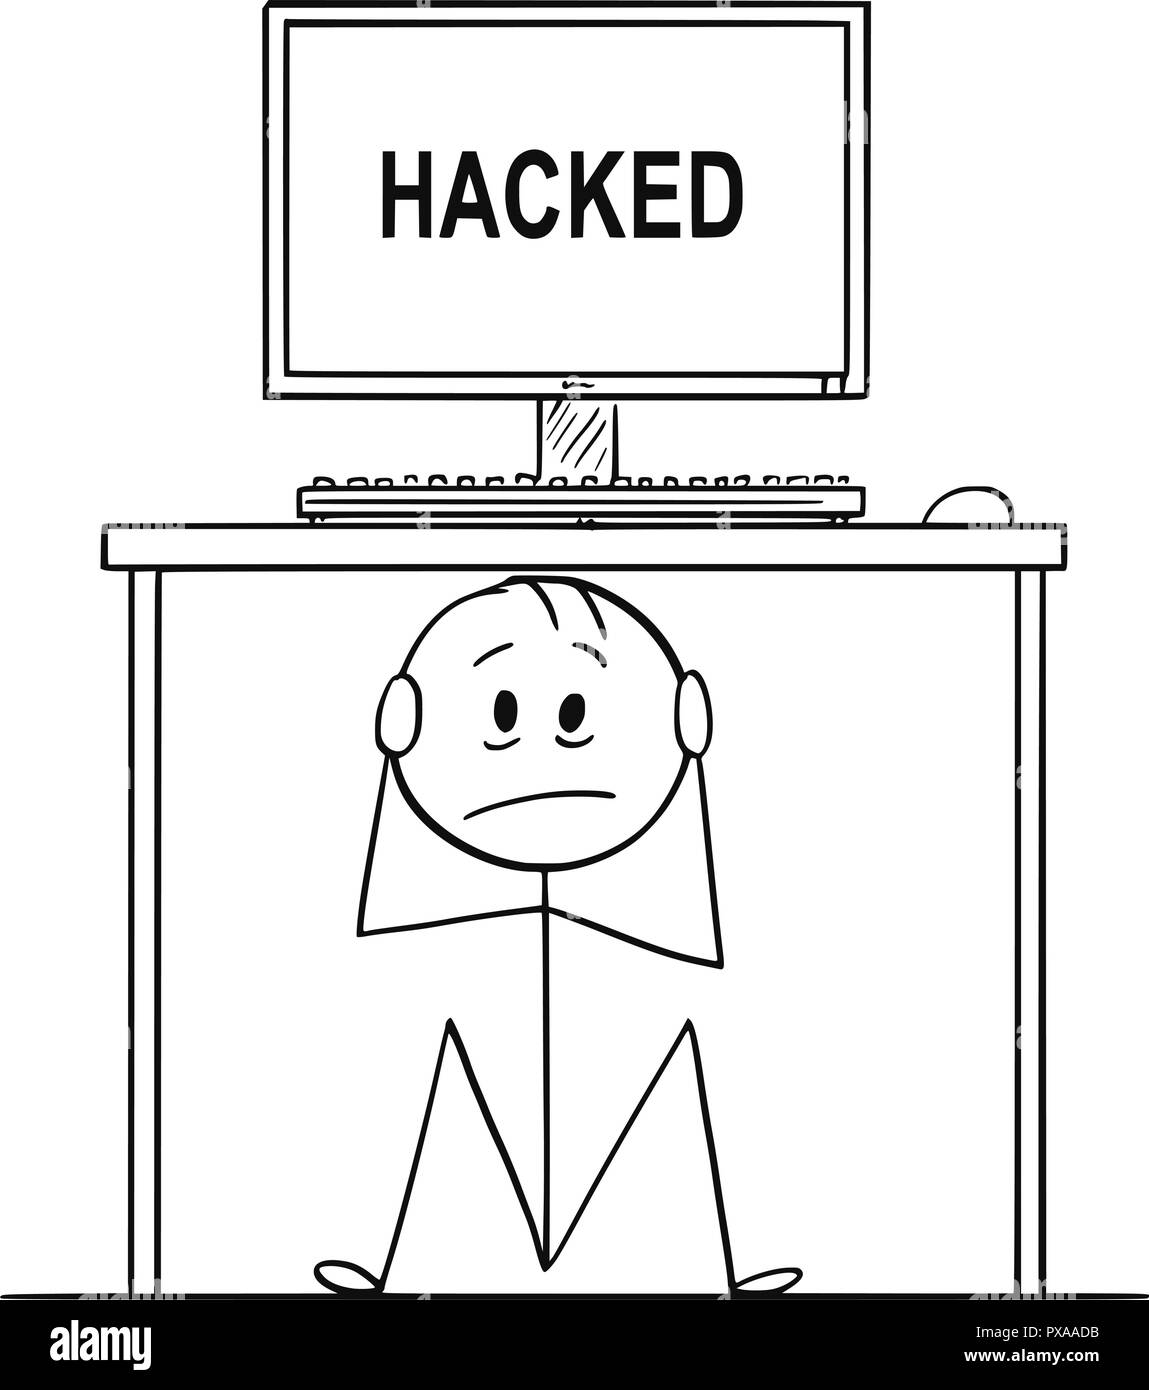 Cartoon of Man or Businessman Sitting hidden Under Desk With Computer With Hacked Text Stock Vector